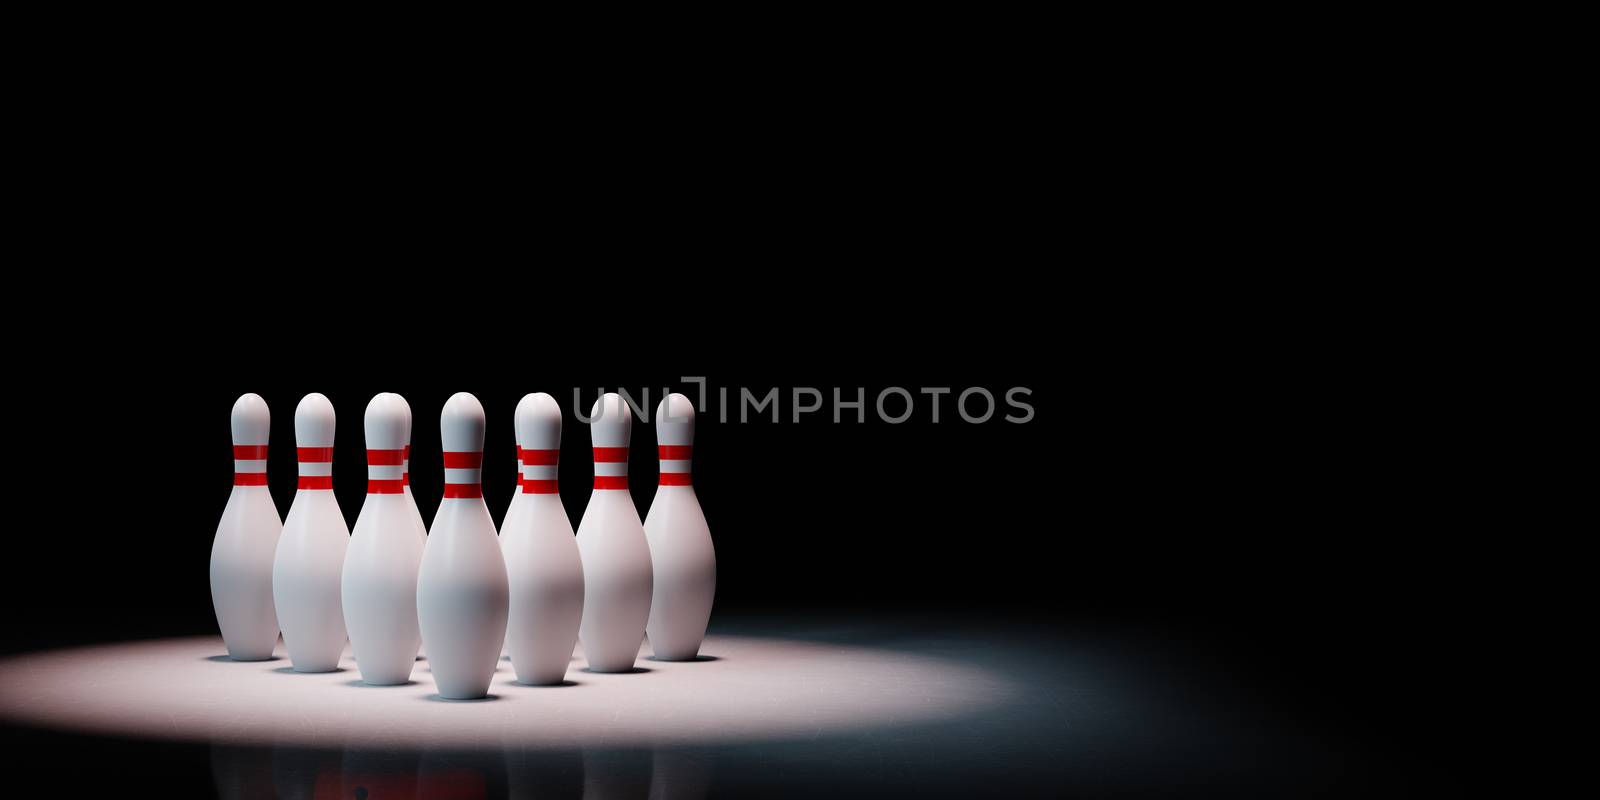 Bowling Skittles Spotlighted on Black Background by make